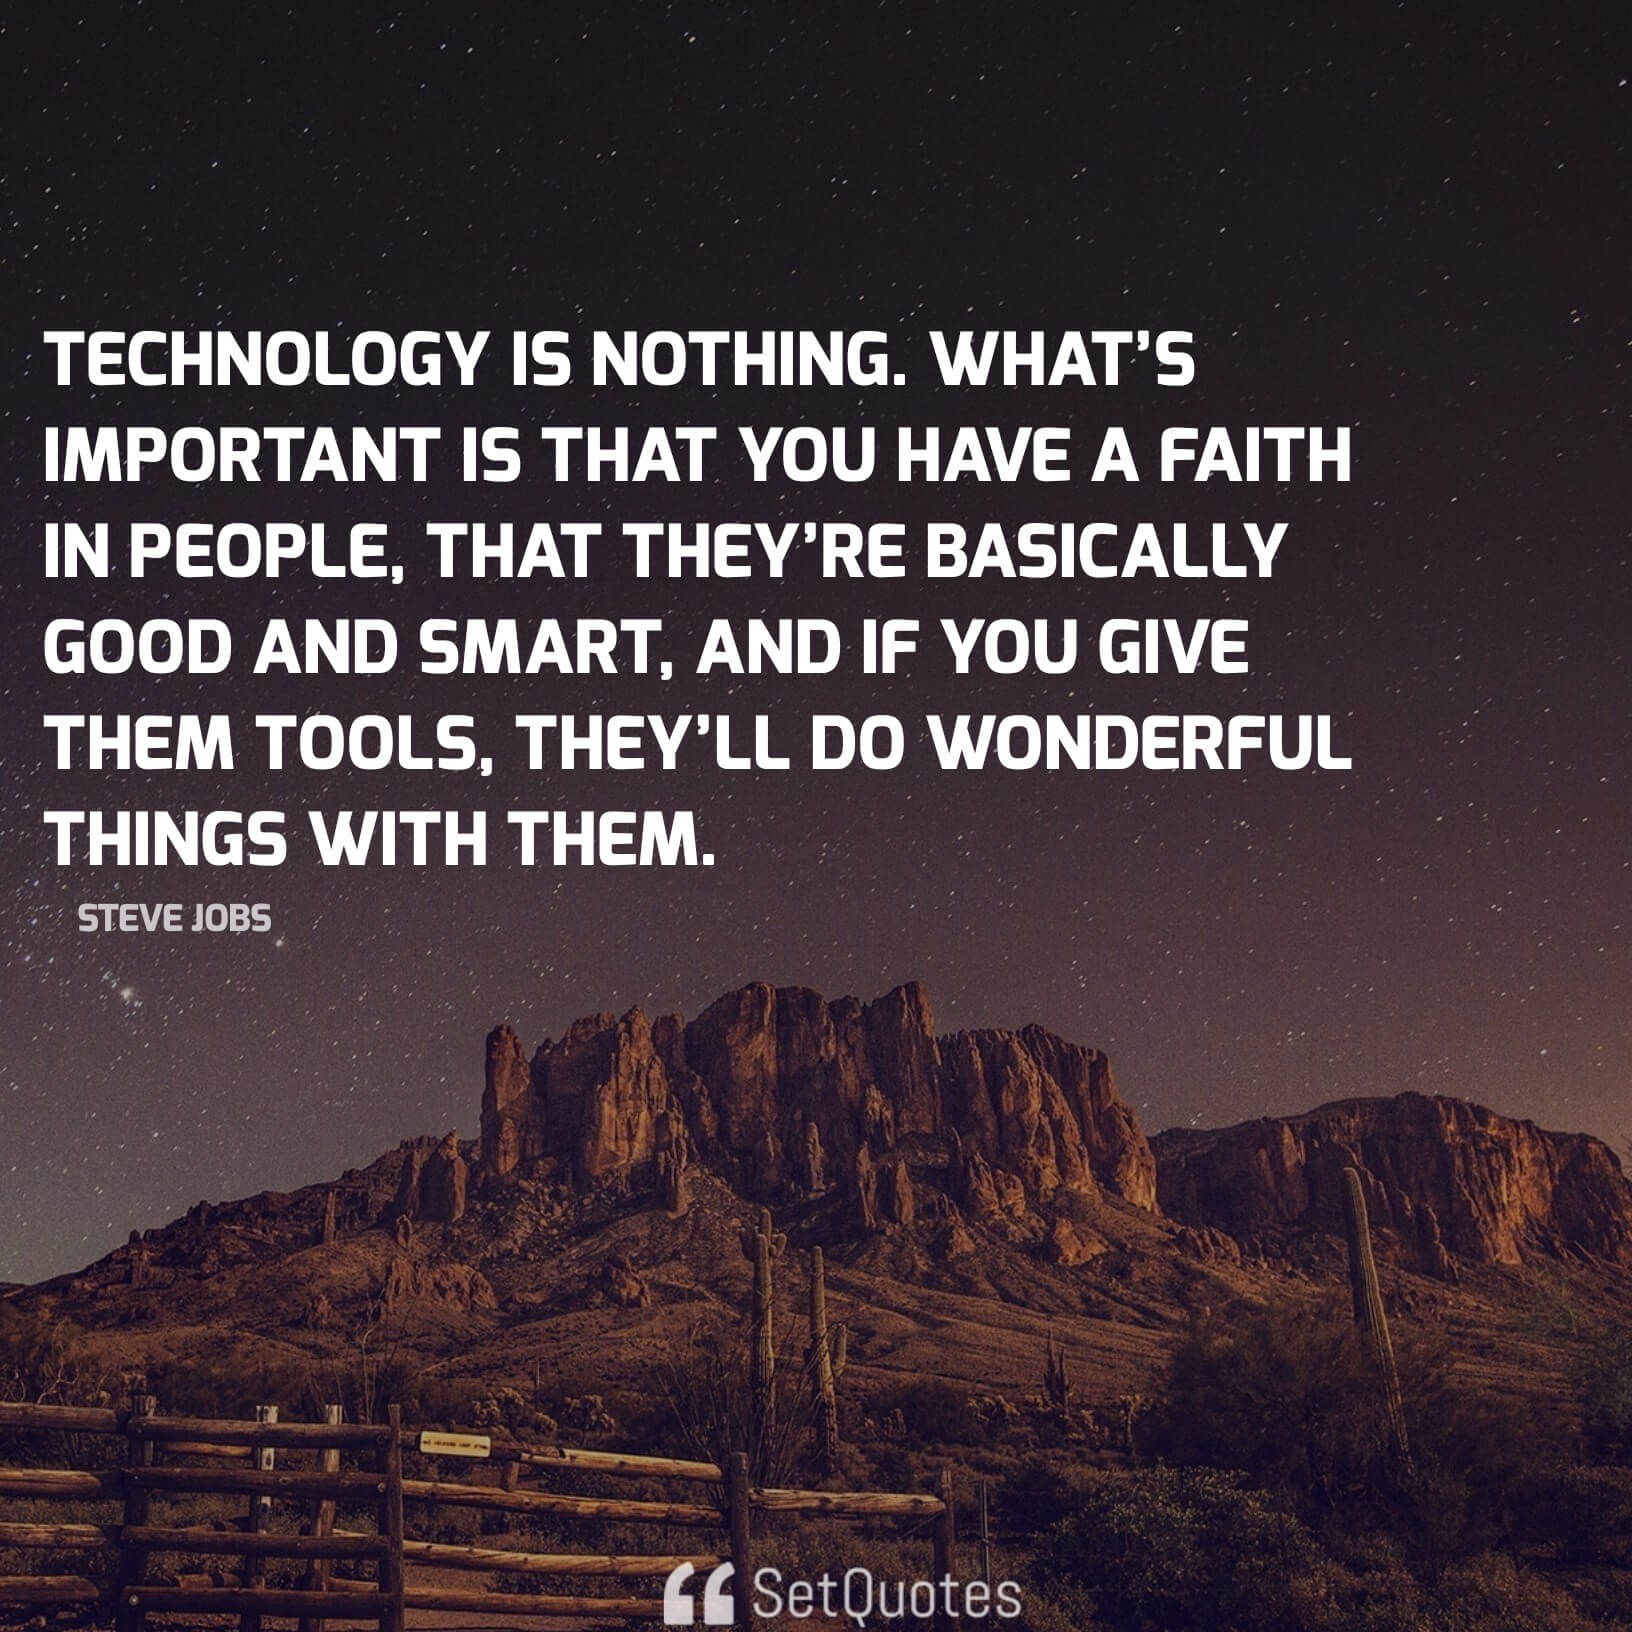 Technology is nothing. What’s important is that you have a faith in people - steve jobs quotes